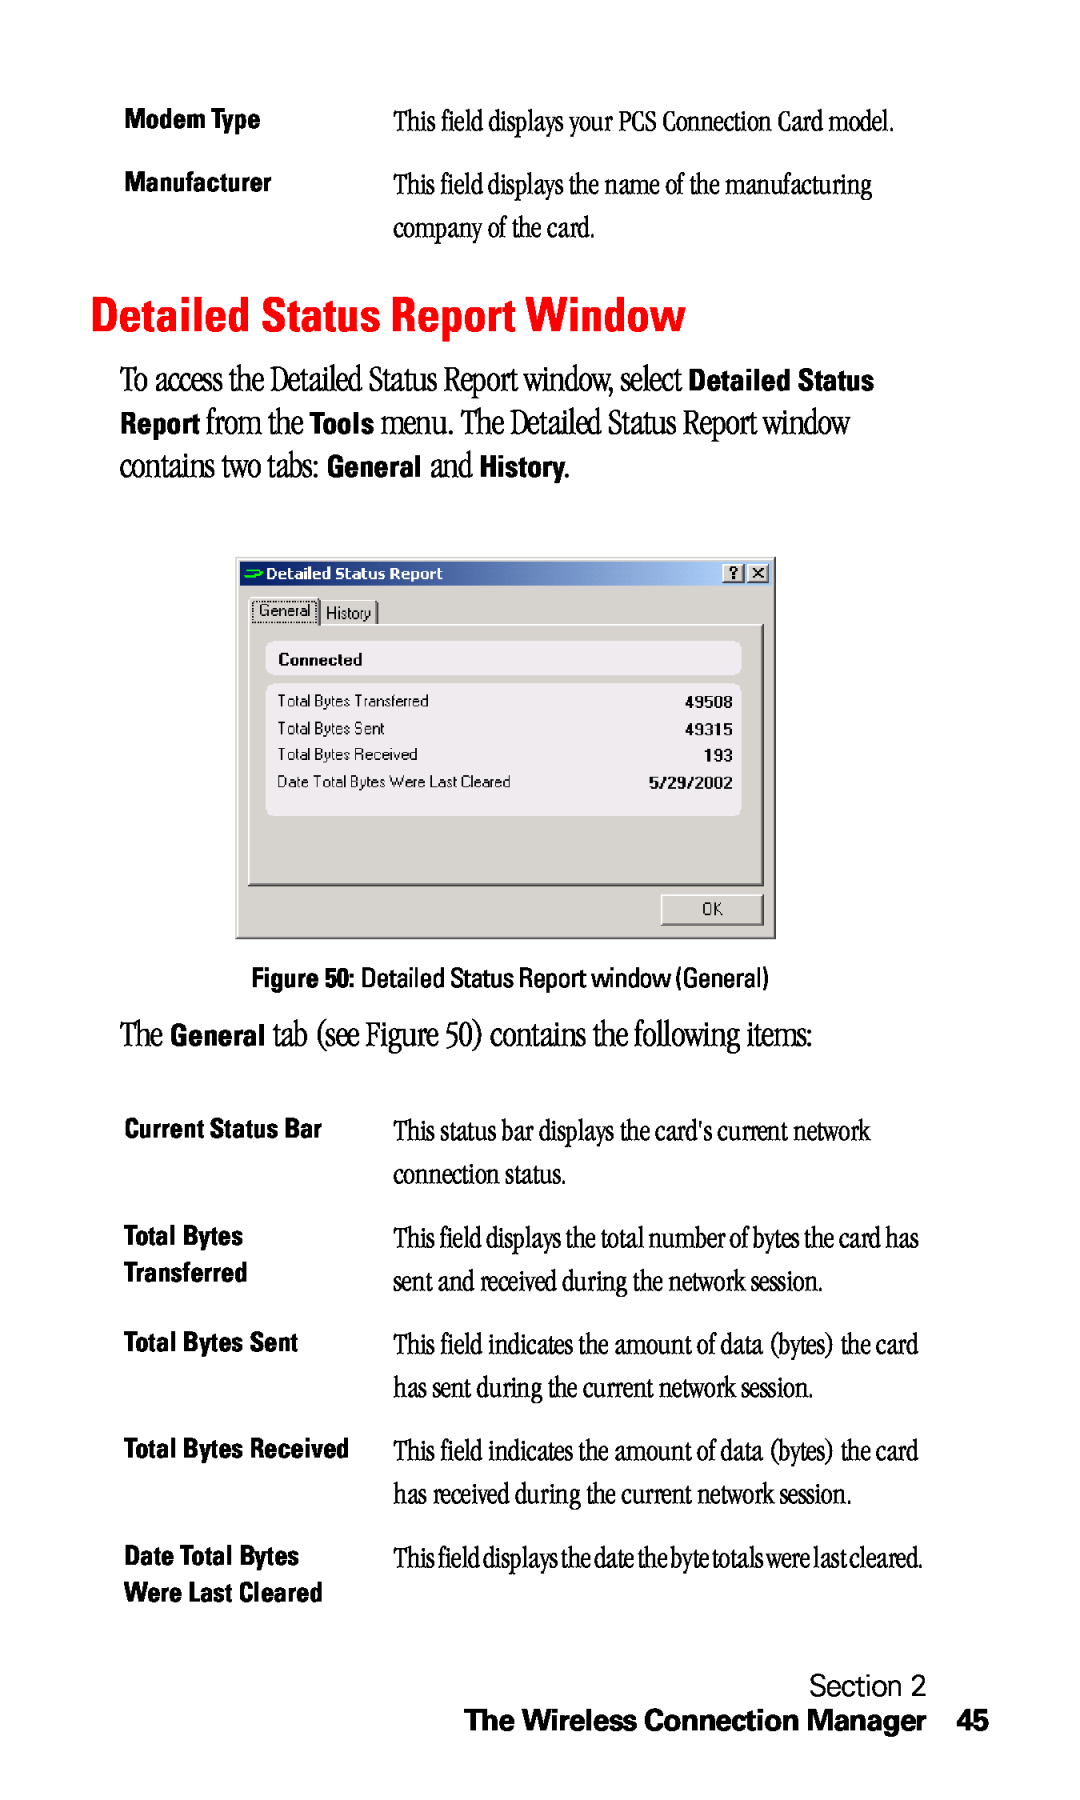 Sprint Nextel C201 Detailed Status Report Window, The General tab see contains the following items, company of the card 